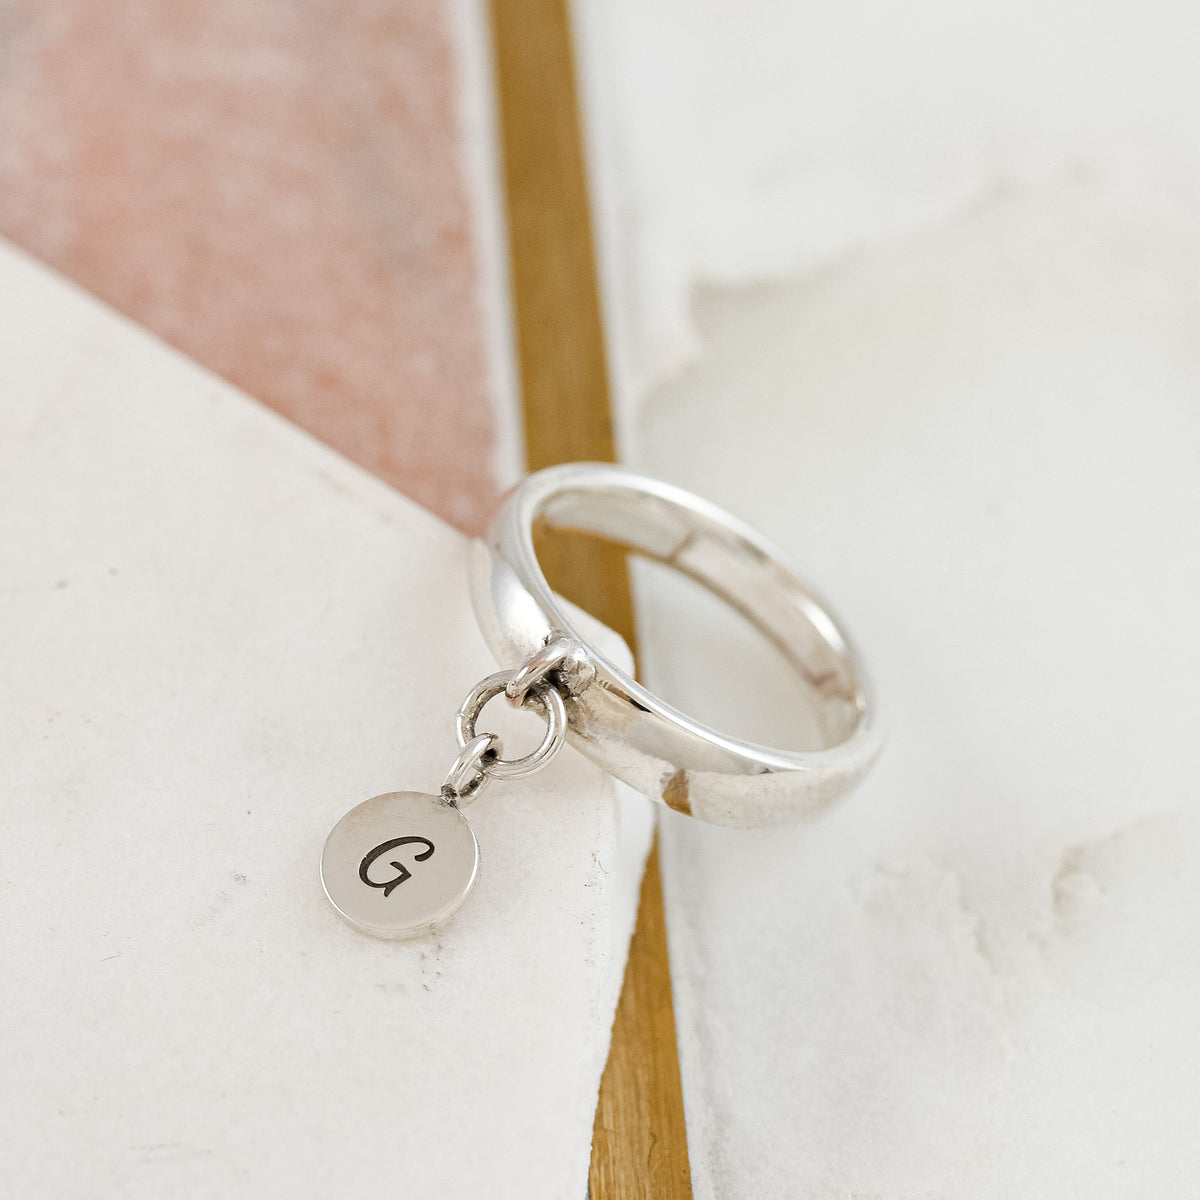 silver disc charm ring engraved with G